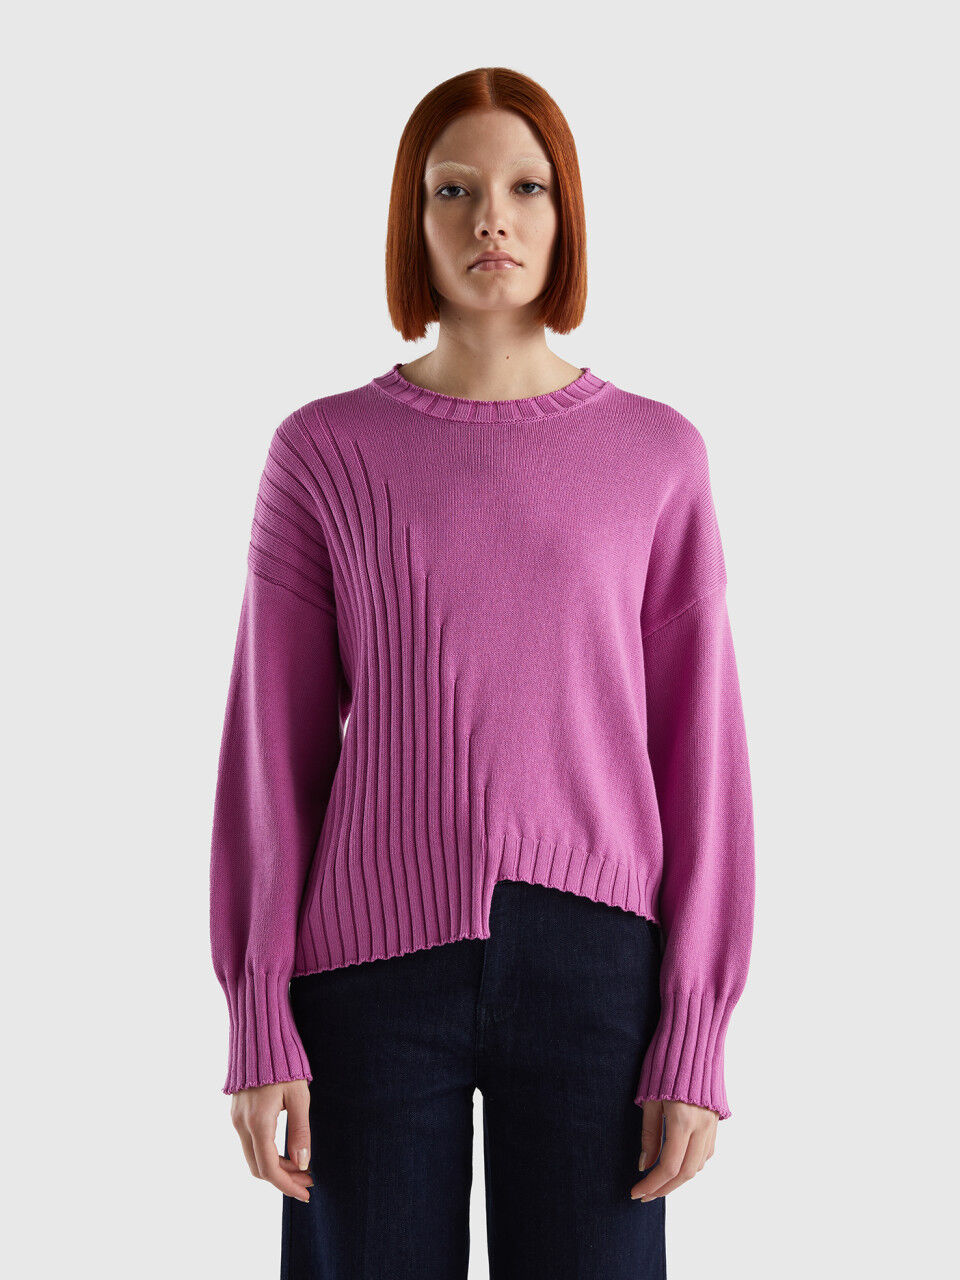 Sweater with uneven bottom